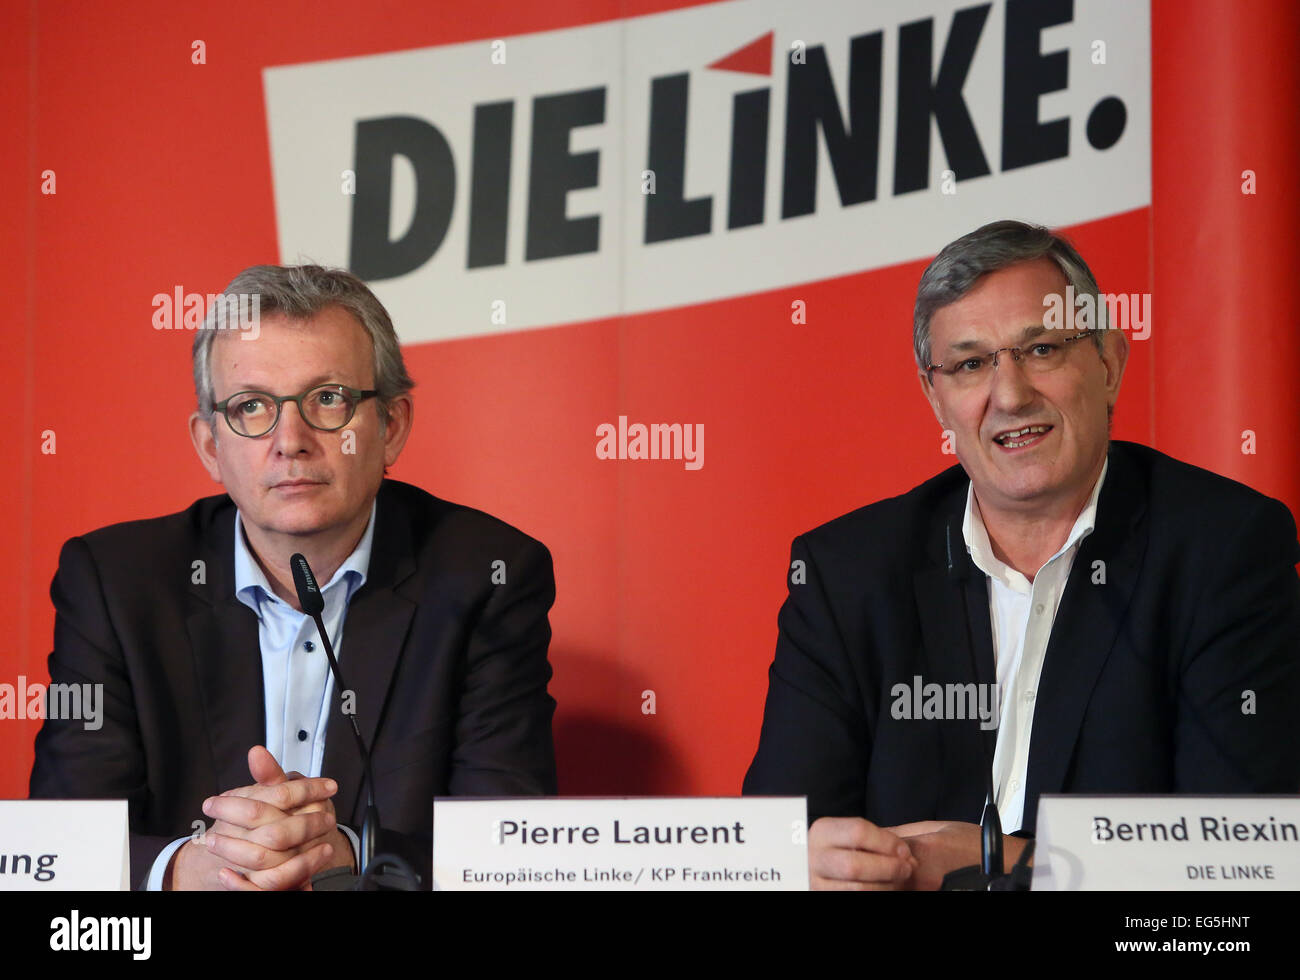 Politicians from the European Left Pierre Laurent (European Left and chairman of the French Communist Party PCF) and Bernd Riexinger (chairman of the Left, Die Linke) give a collective press conference. The European Left parties discuss their call 'Hope for a democratic awakening in Europe.' Photo: STEPHANIE PILICK/dpa Stock Photo